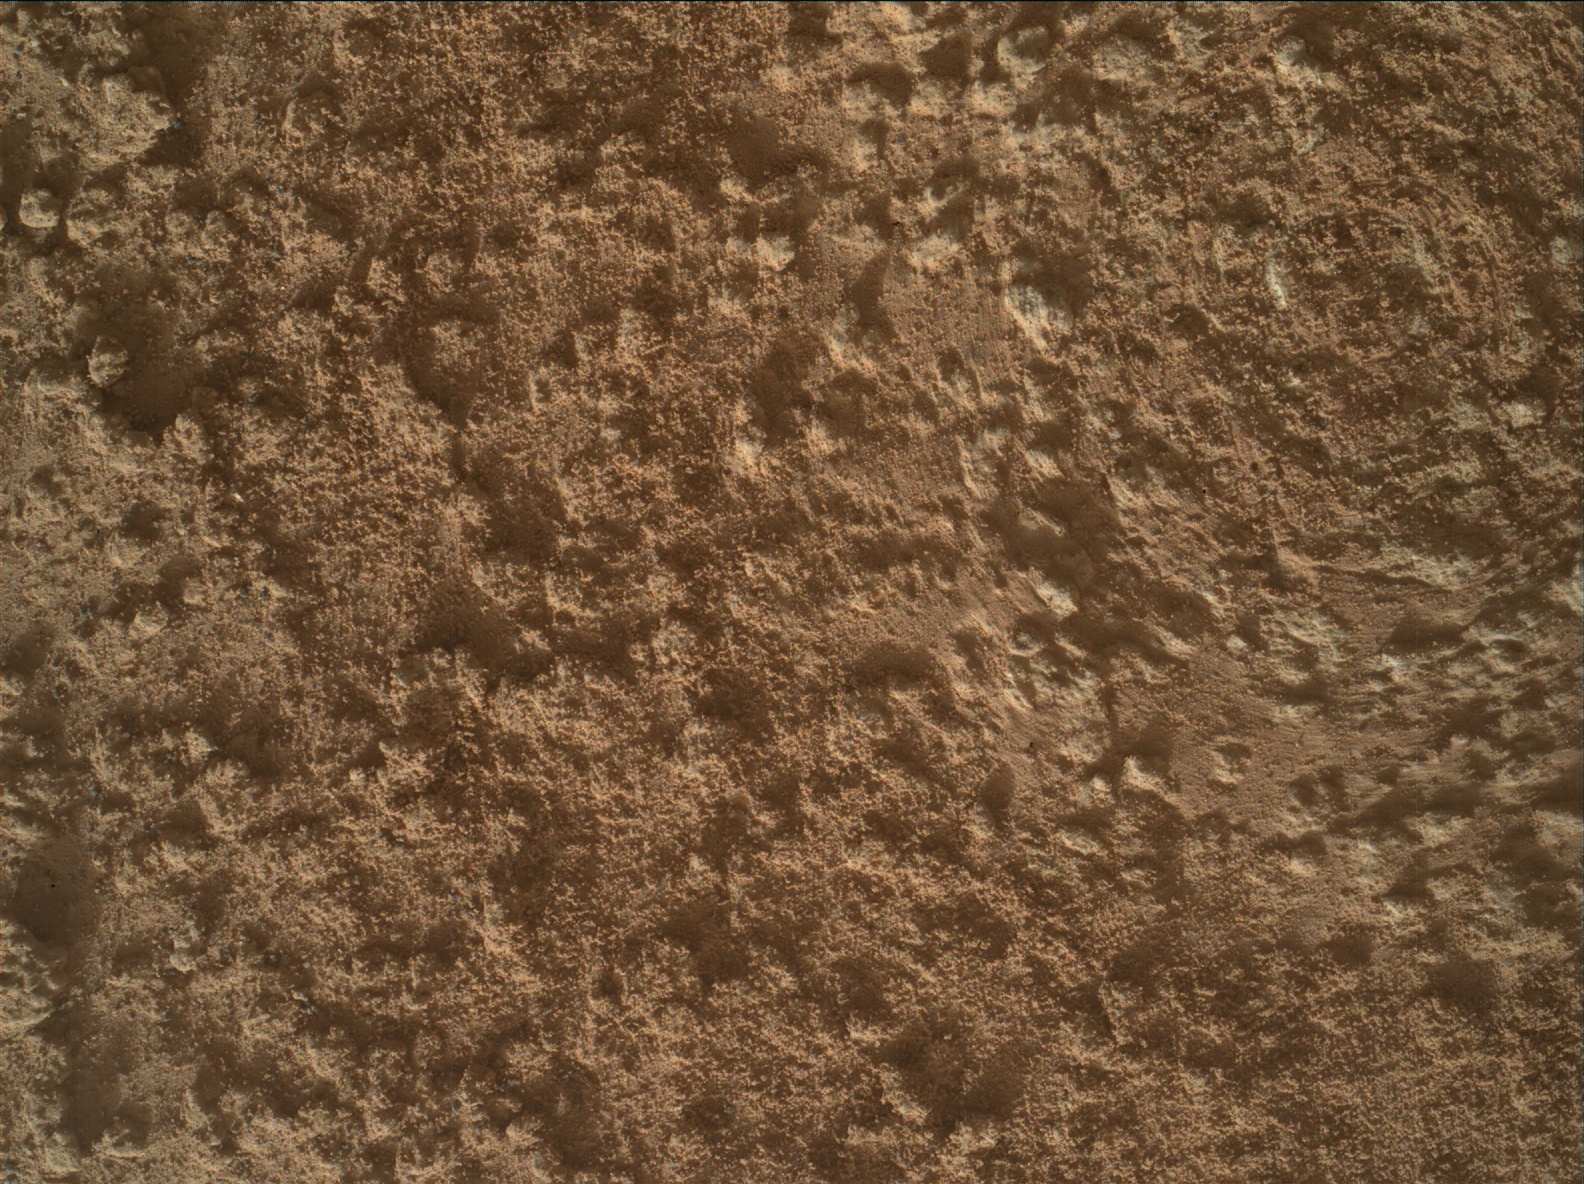 Nasa's Mars rover Curiosity acquired this image using its Mars Hand Lens Imager (MAHLI) on Sol 3578